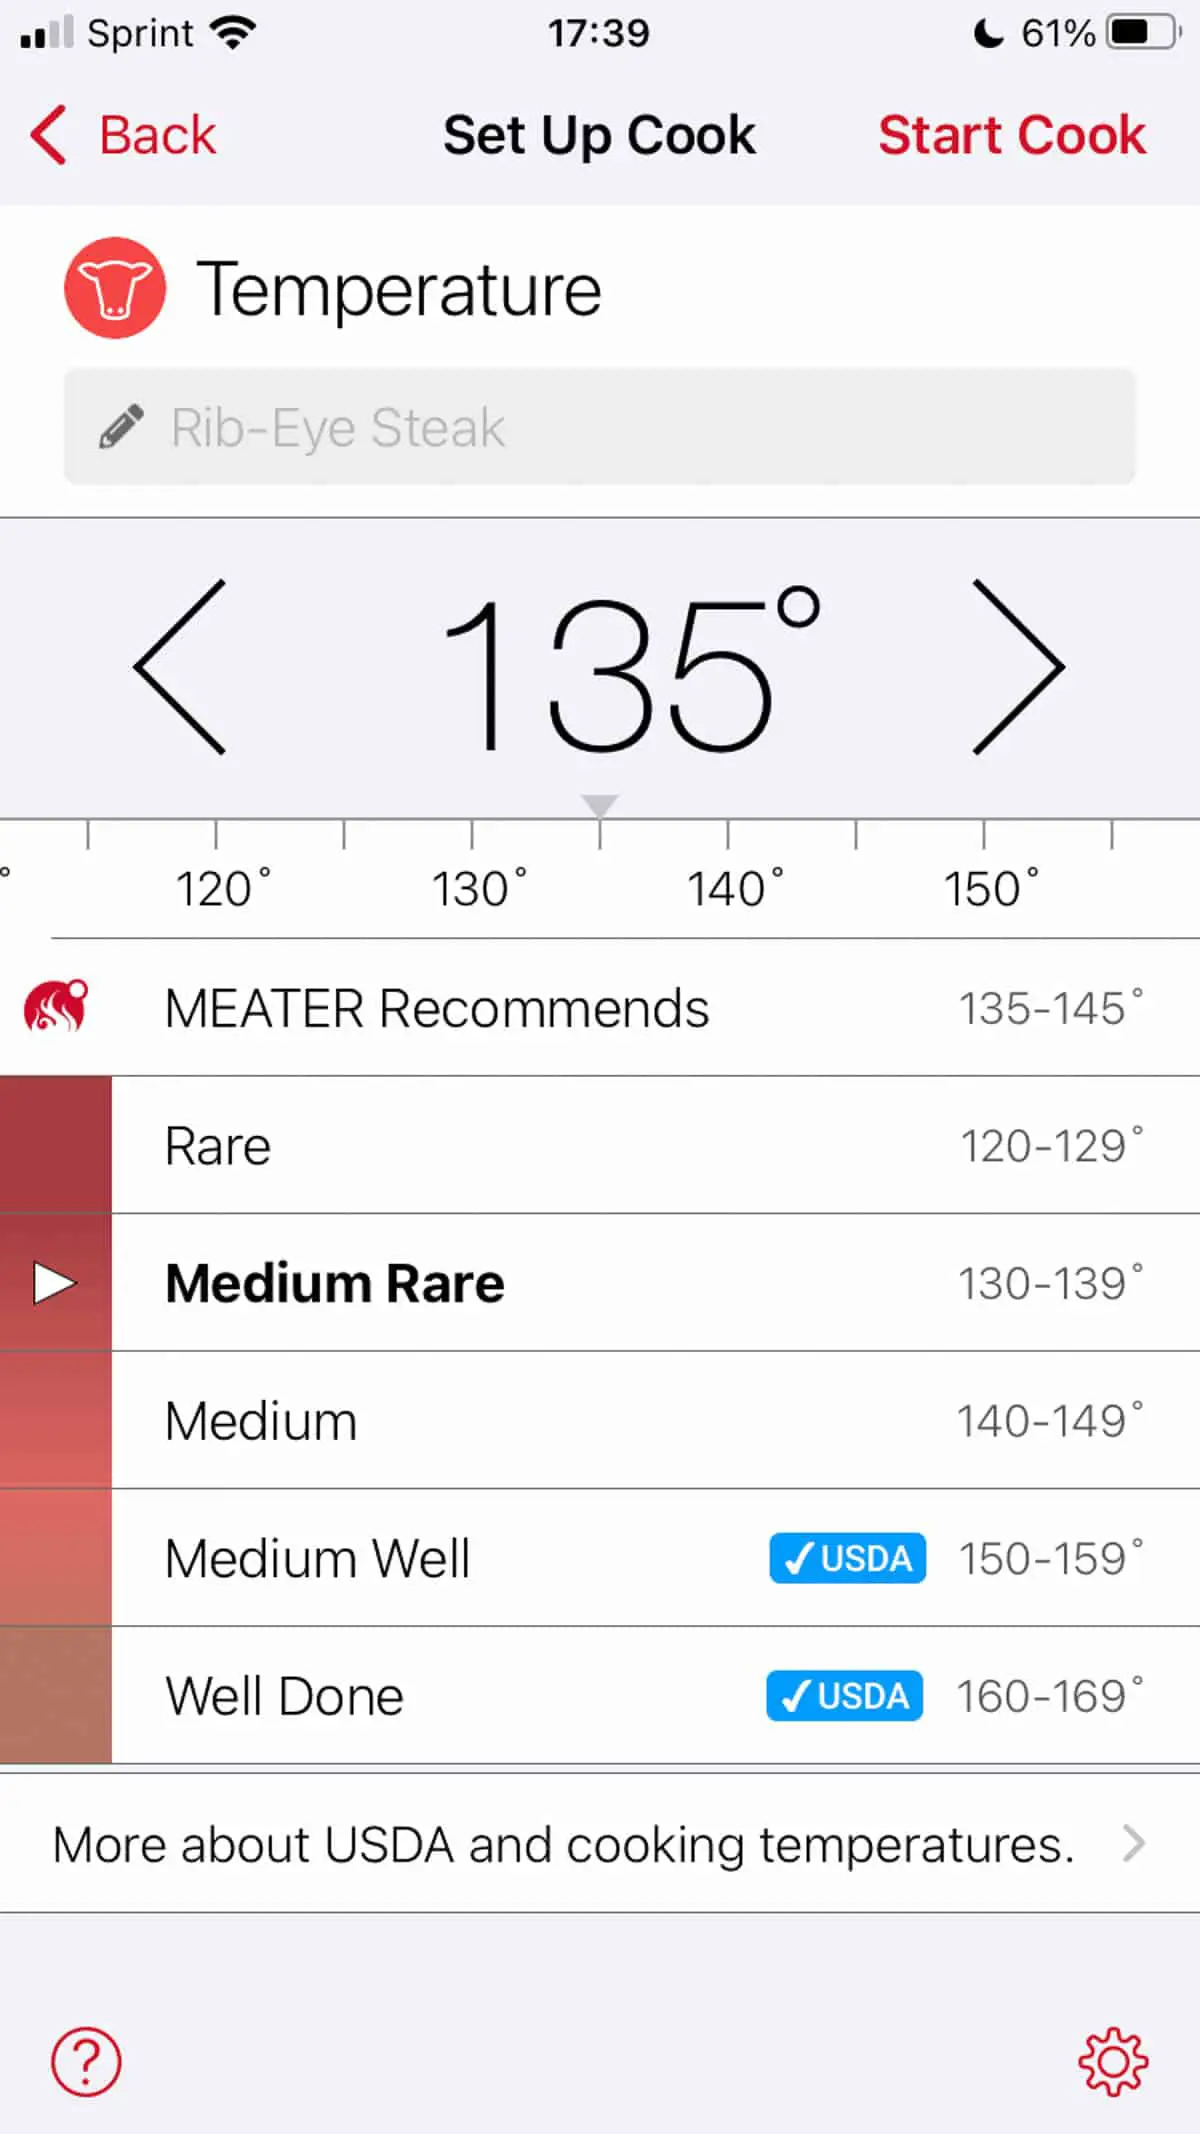 A panel showing a screenshot of the Meater thermometer app showing the Set Up Cook screen.